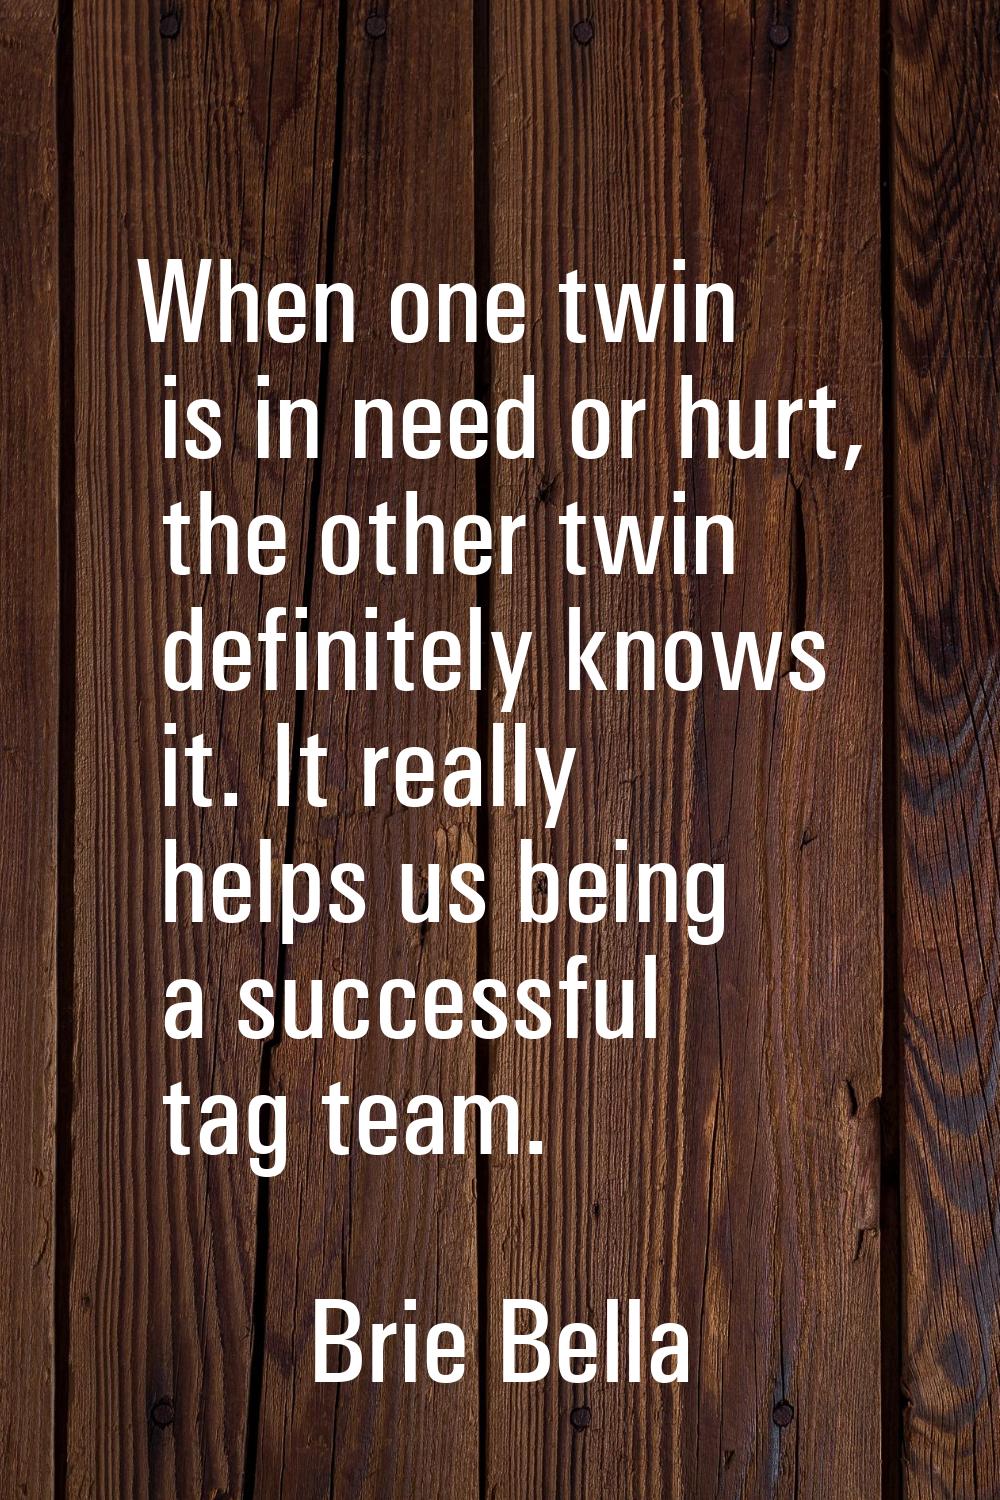 When one twin is in need or hurt, the other twin definitely knows it. It really helps us being a su